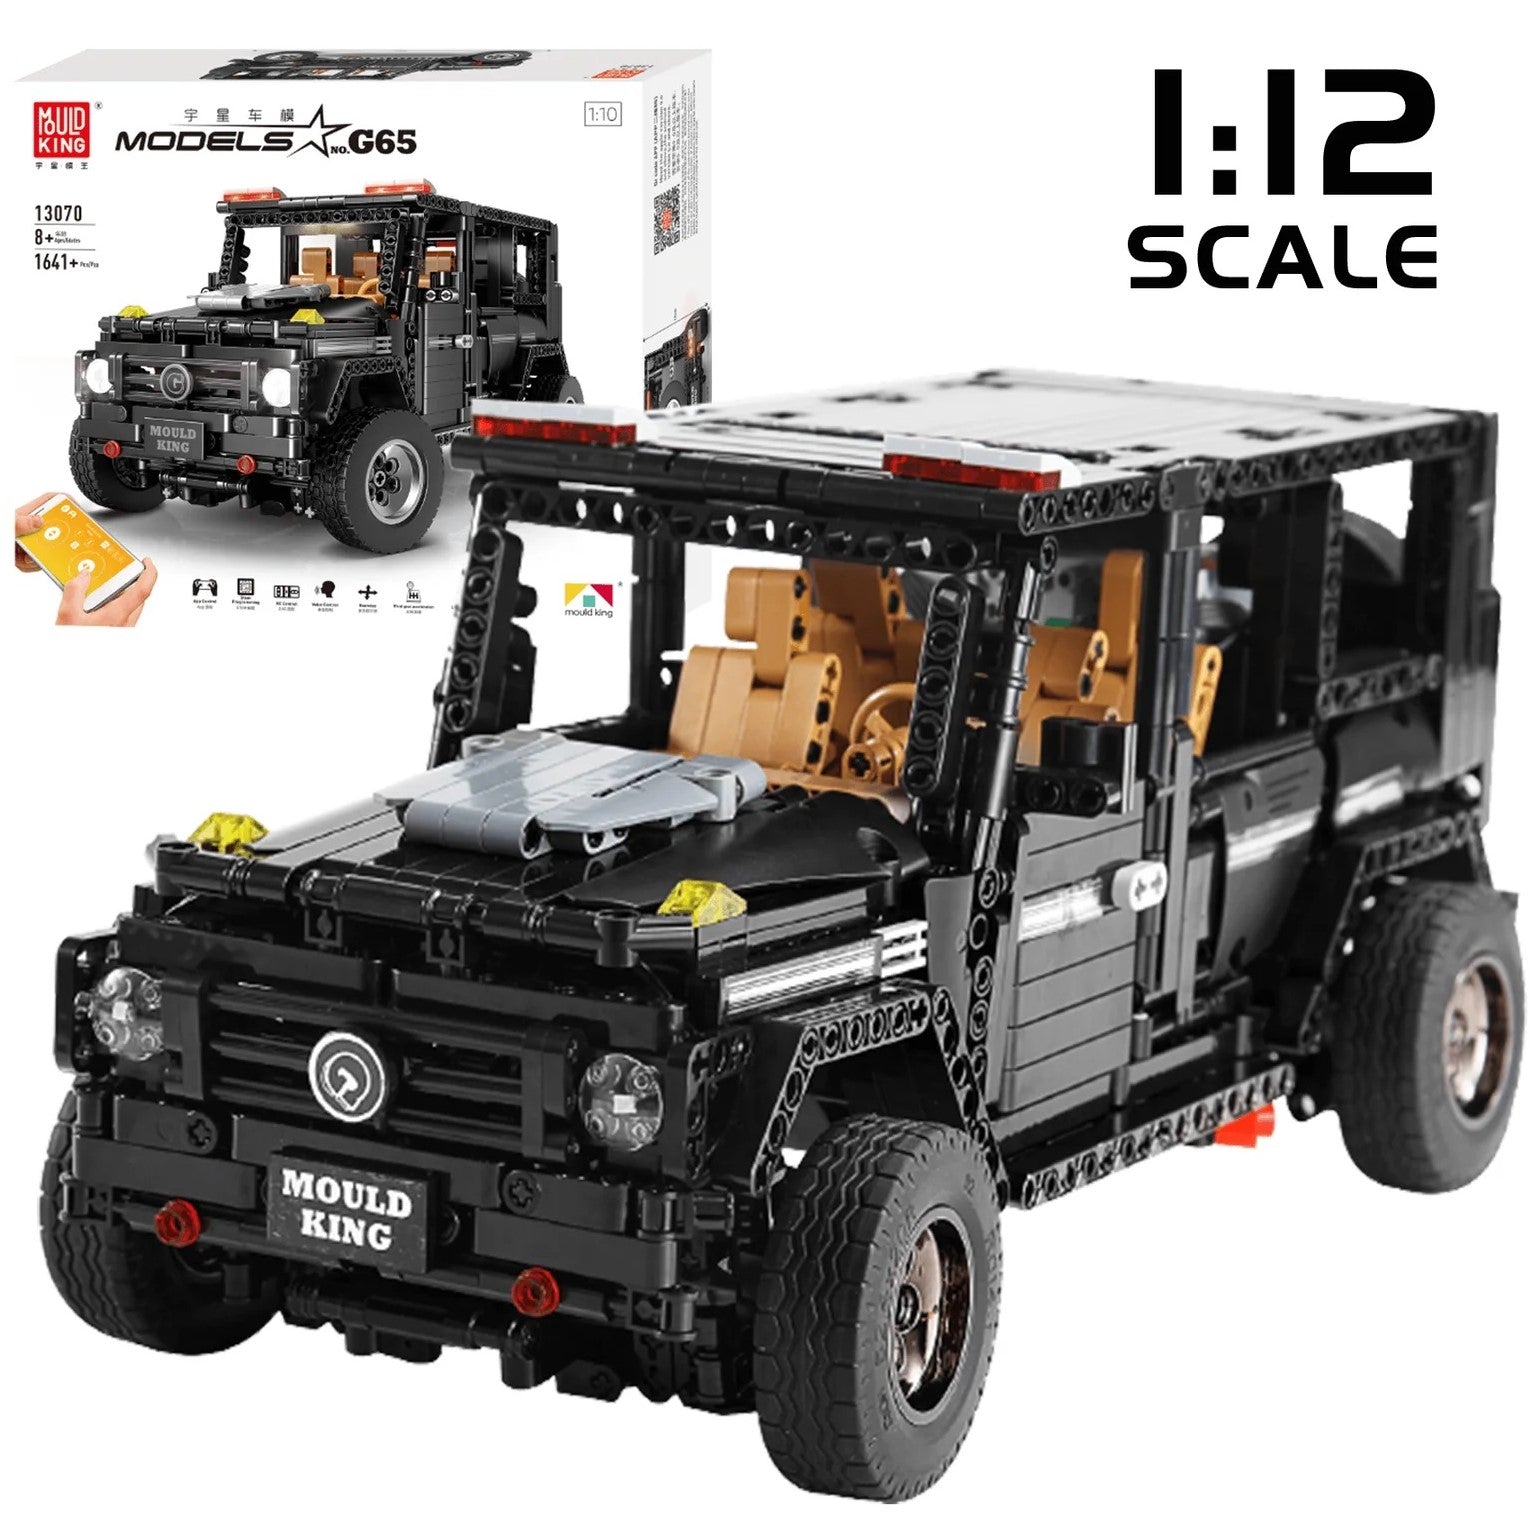 Mould King 13070 Mercedes Benz G65 RC Car with 1641 pieces